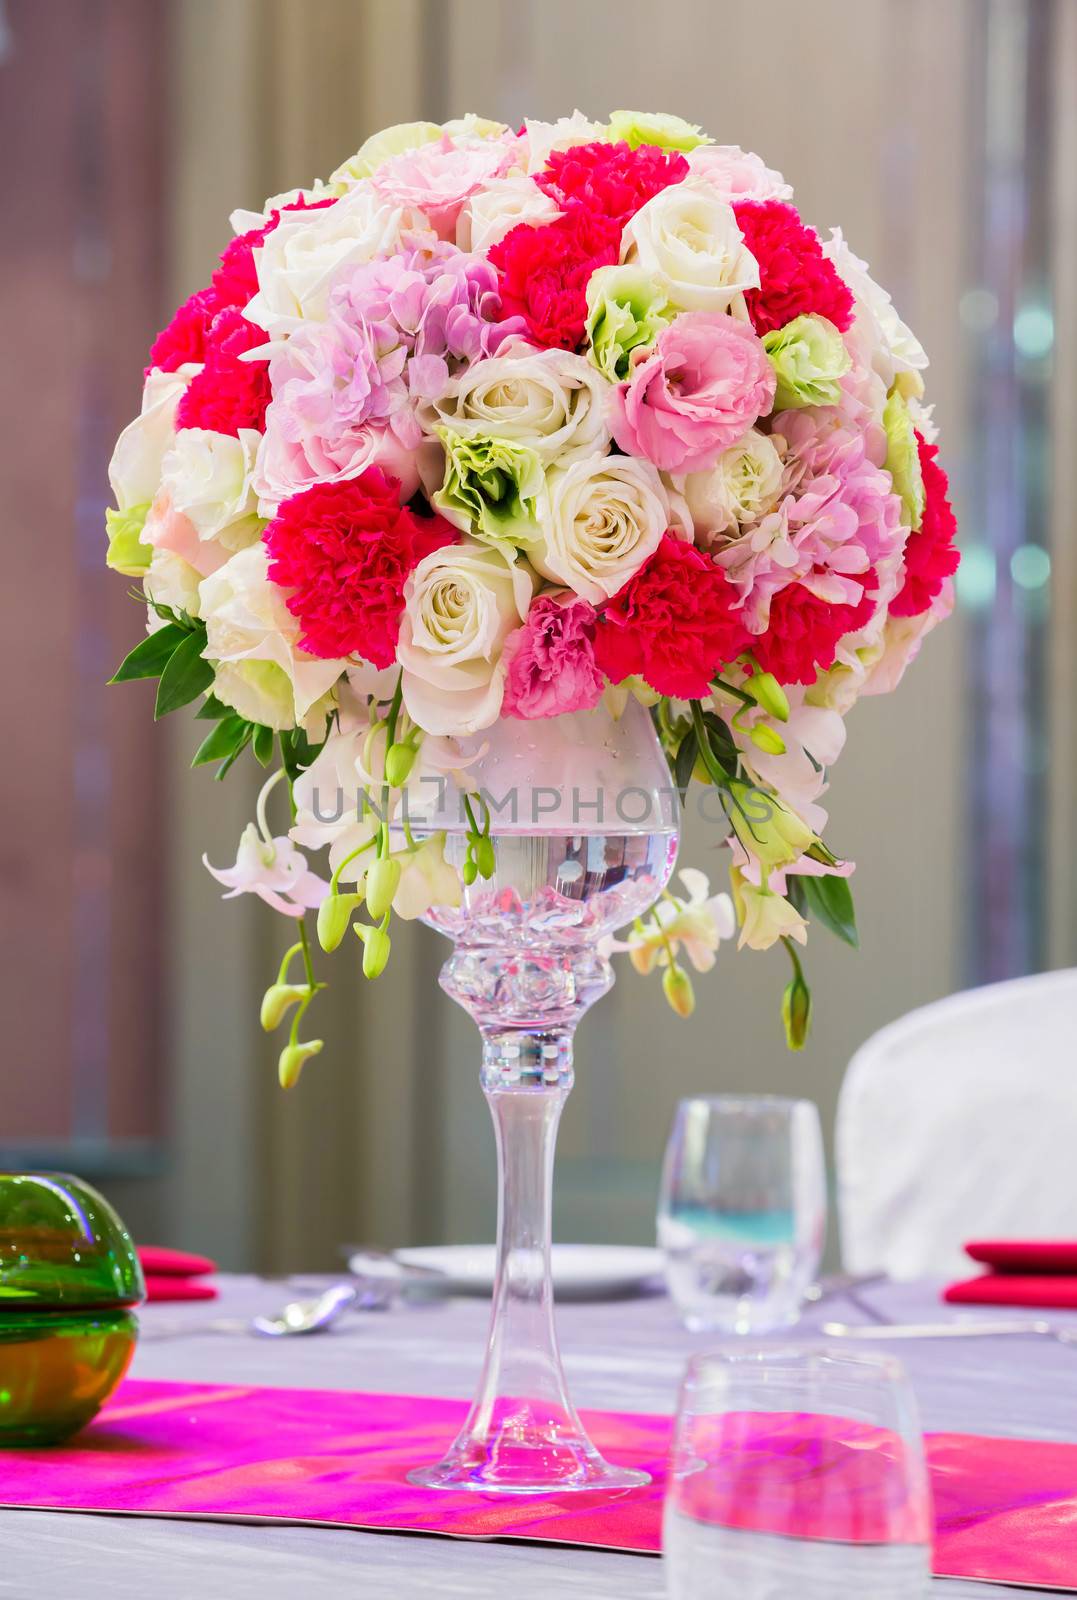 Flower bouquet in glass vase on dining table